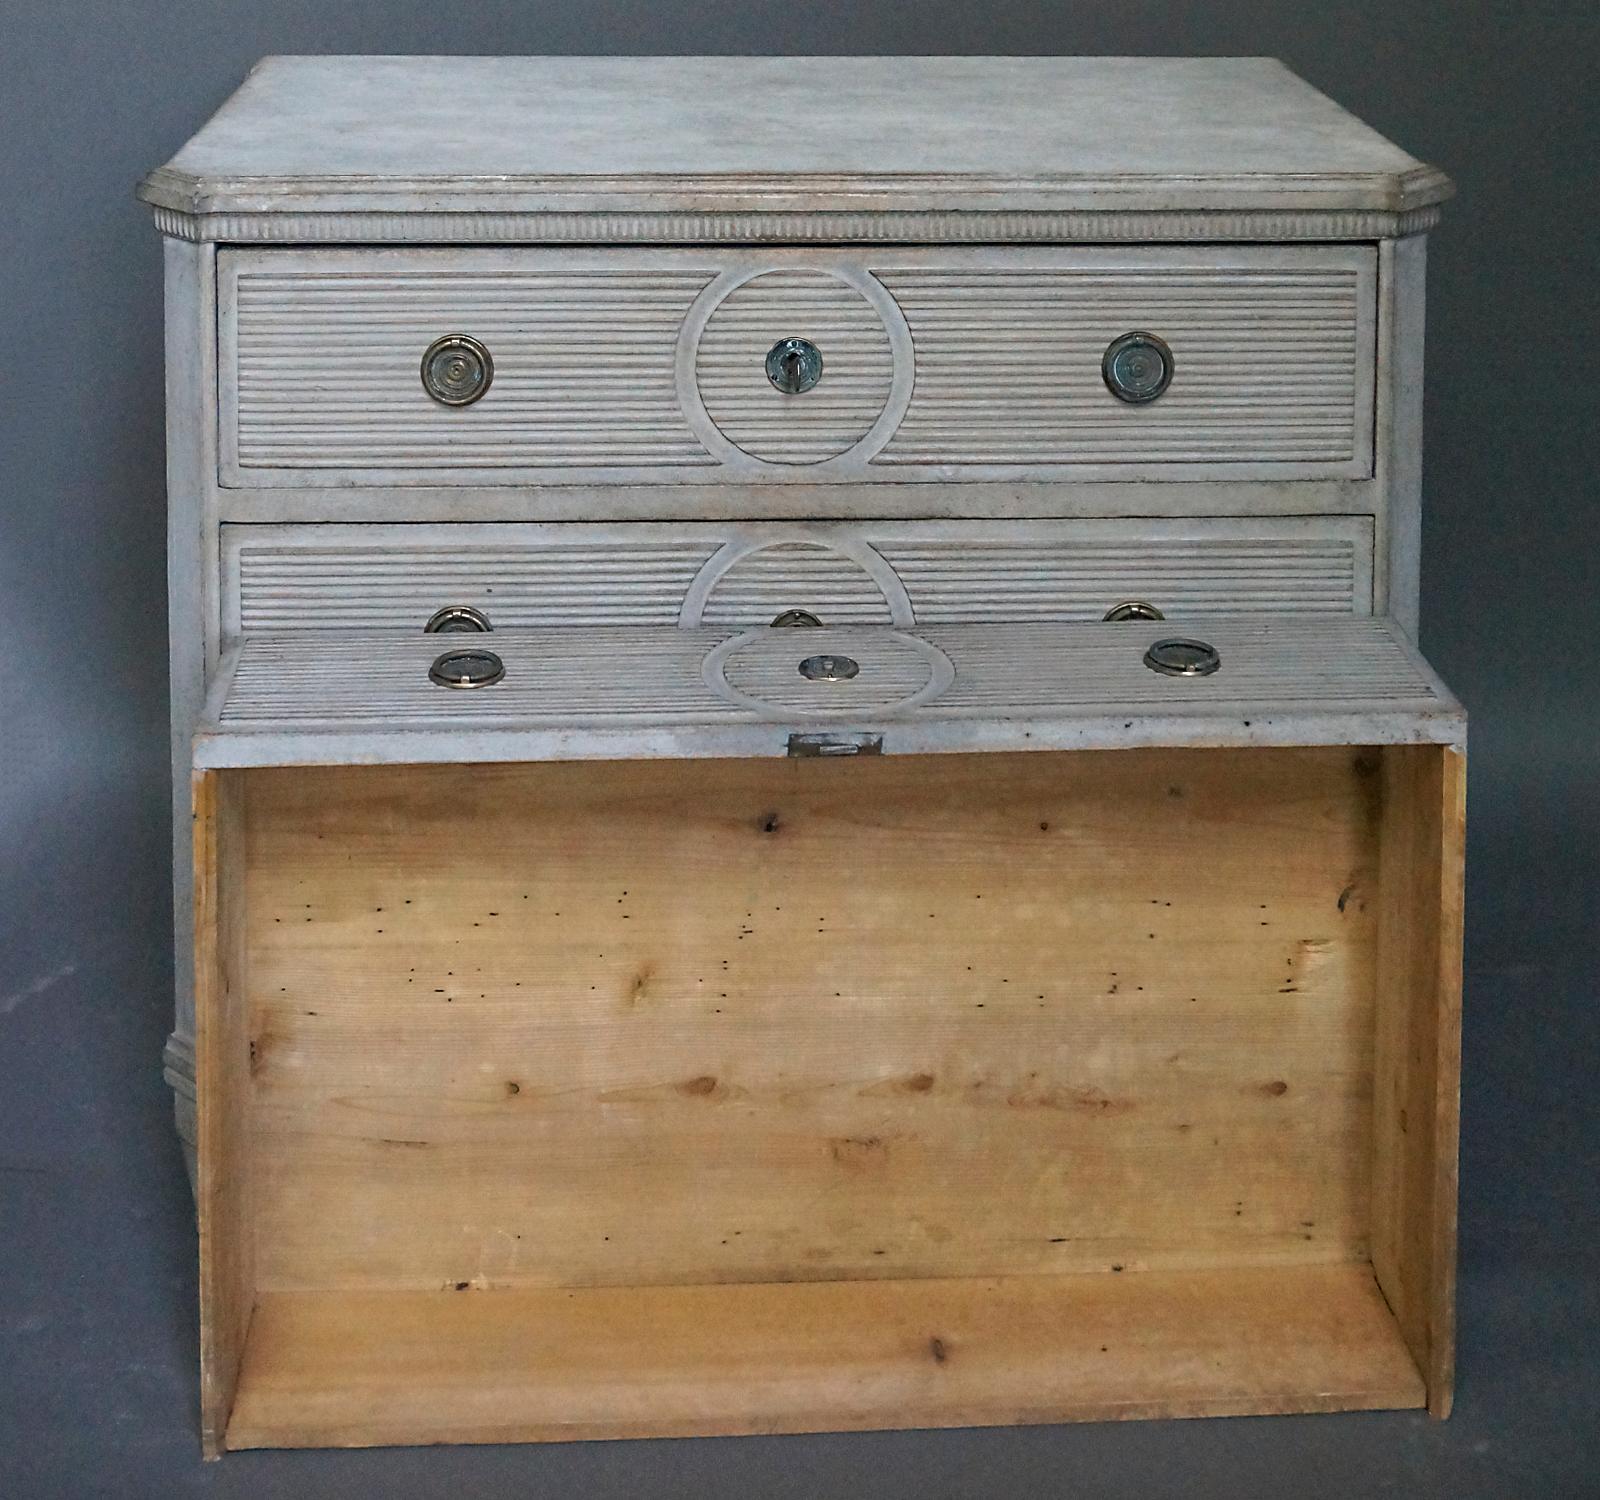 Swedish neoclassical chest of drawers, circa 1860, having reeded drawer fronts with recessed circles around the escutcheons. Shaped top with canted corners and unusual molding. Brass hardware, tapering square legs.